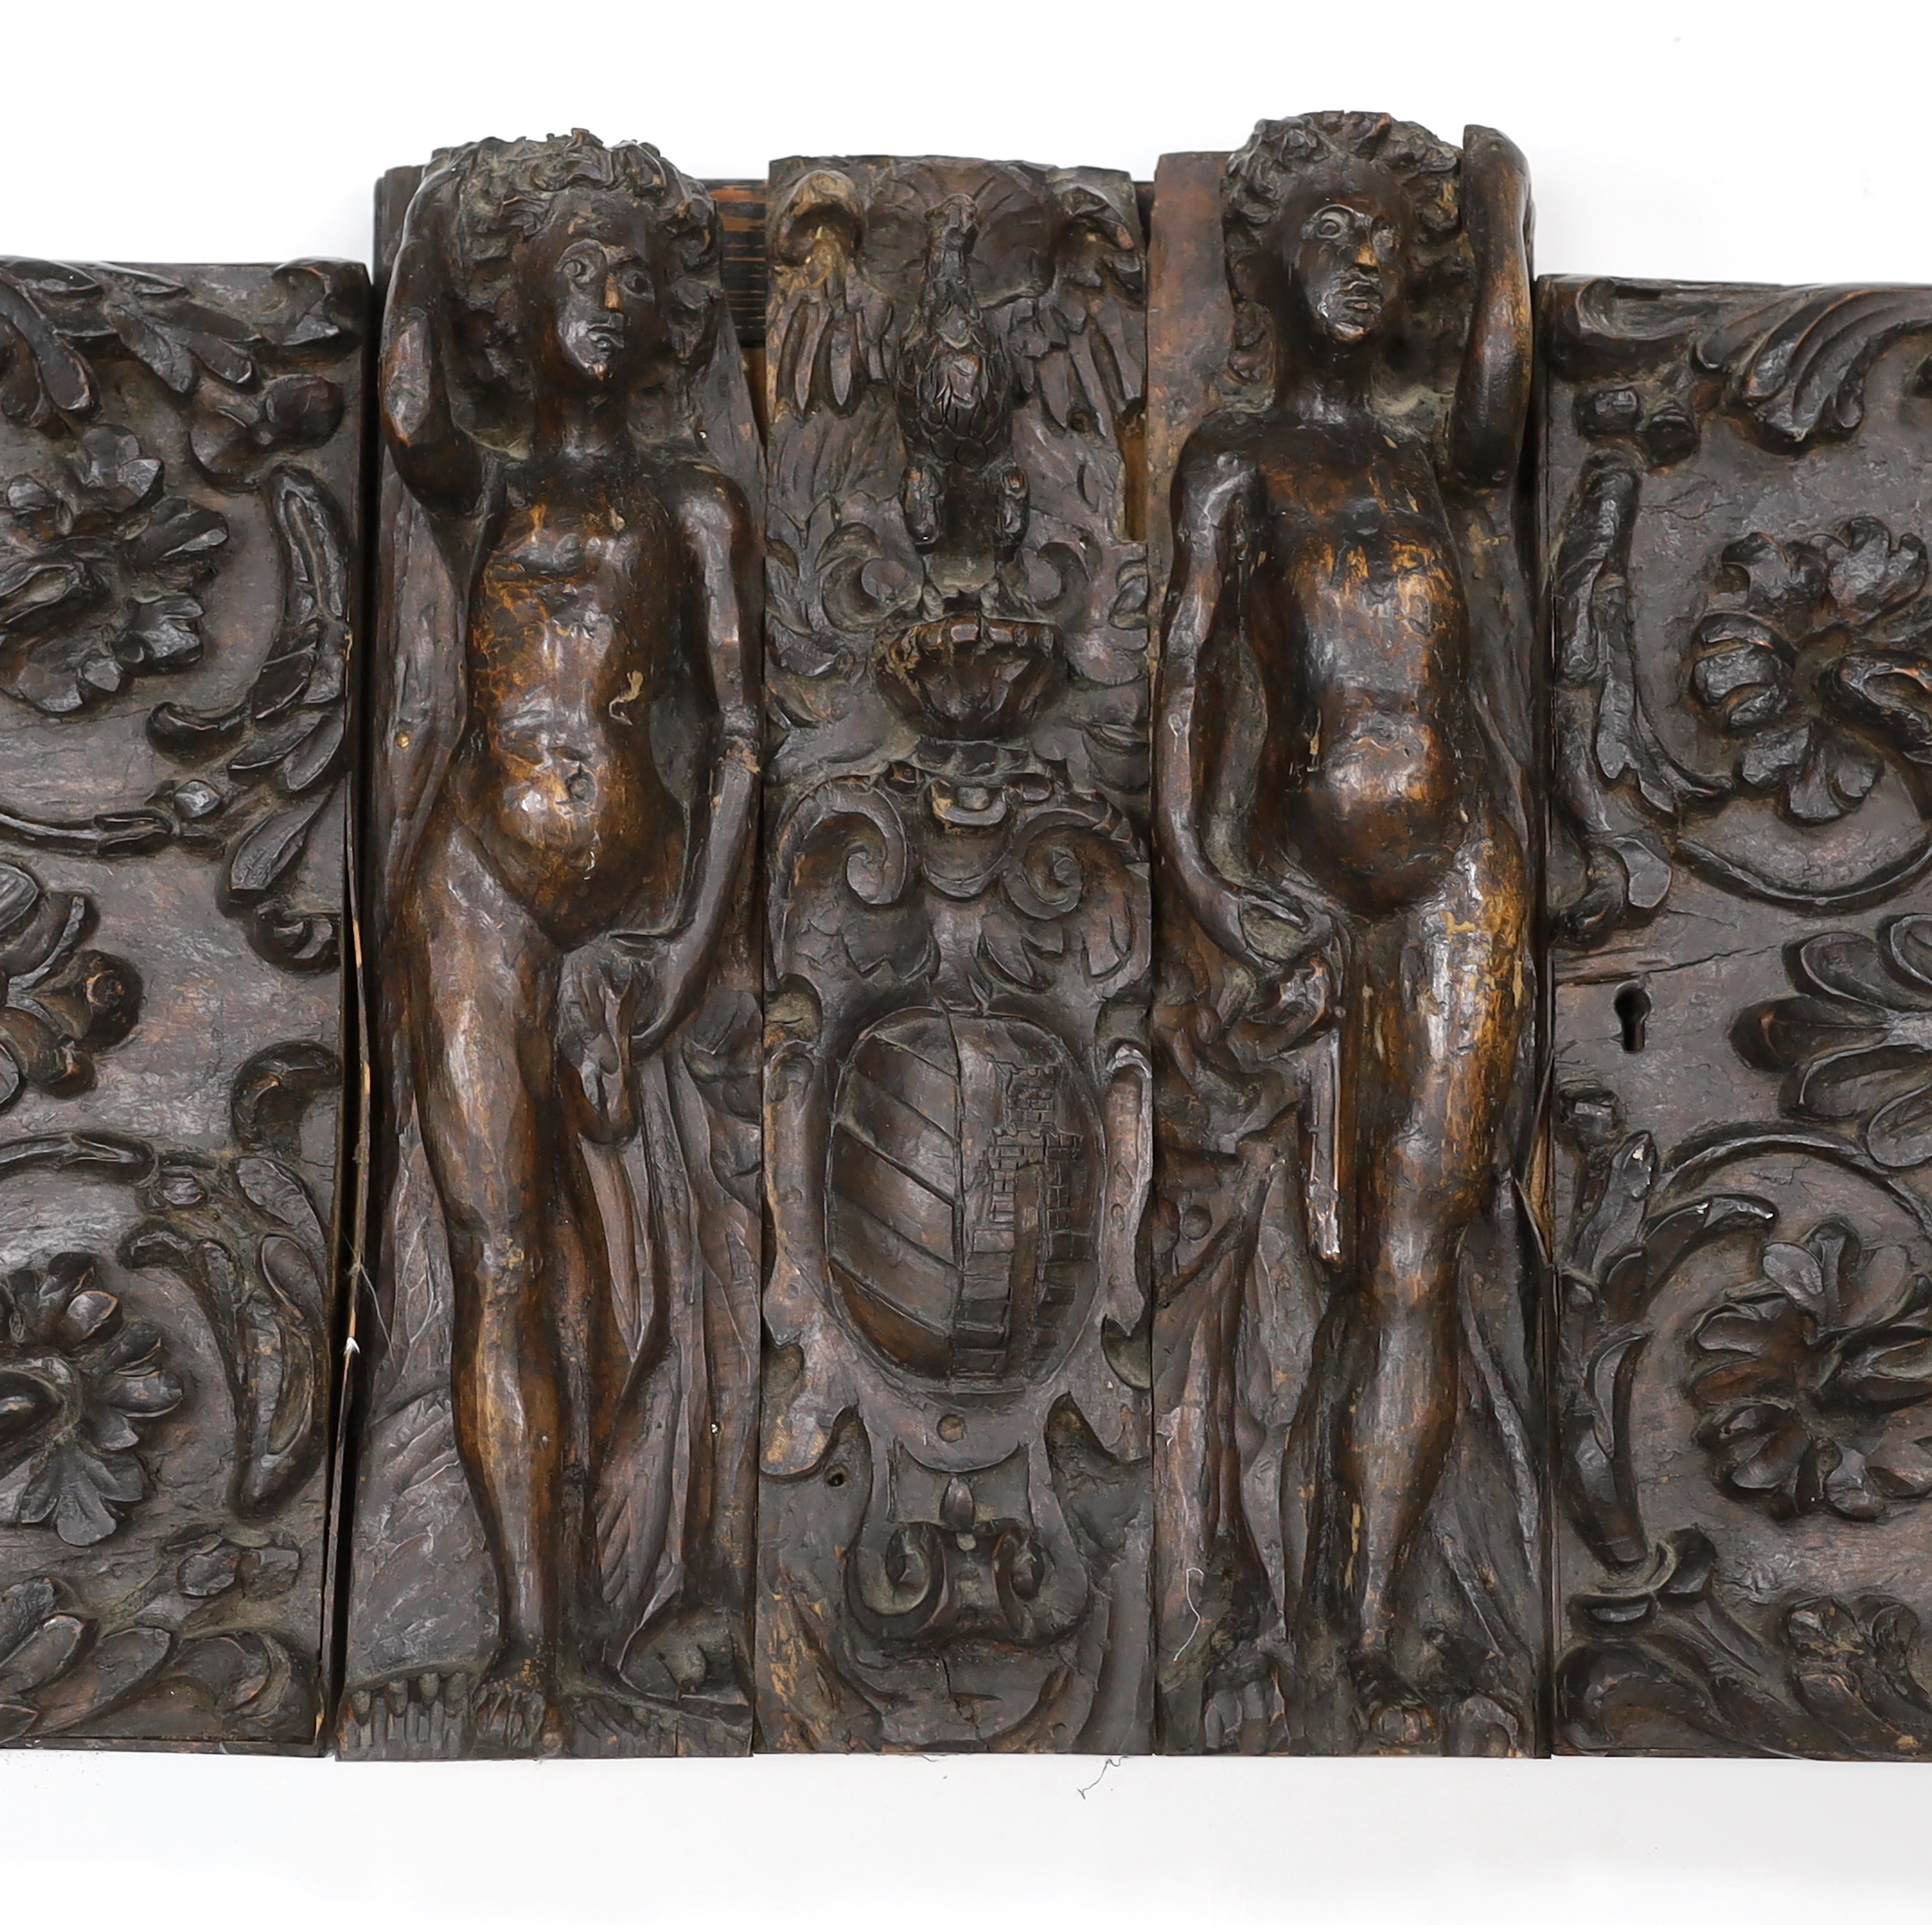 A 17th century French carved walnut triptych panel, 121cm wide, 37cm high